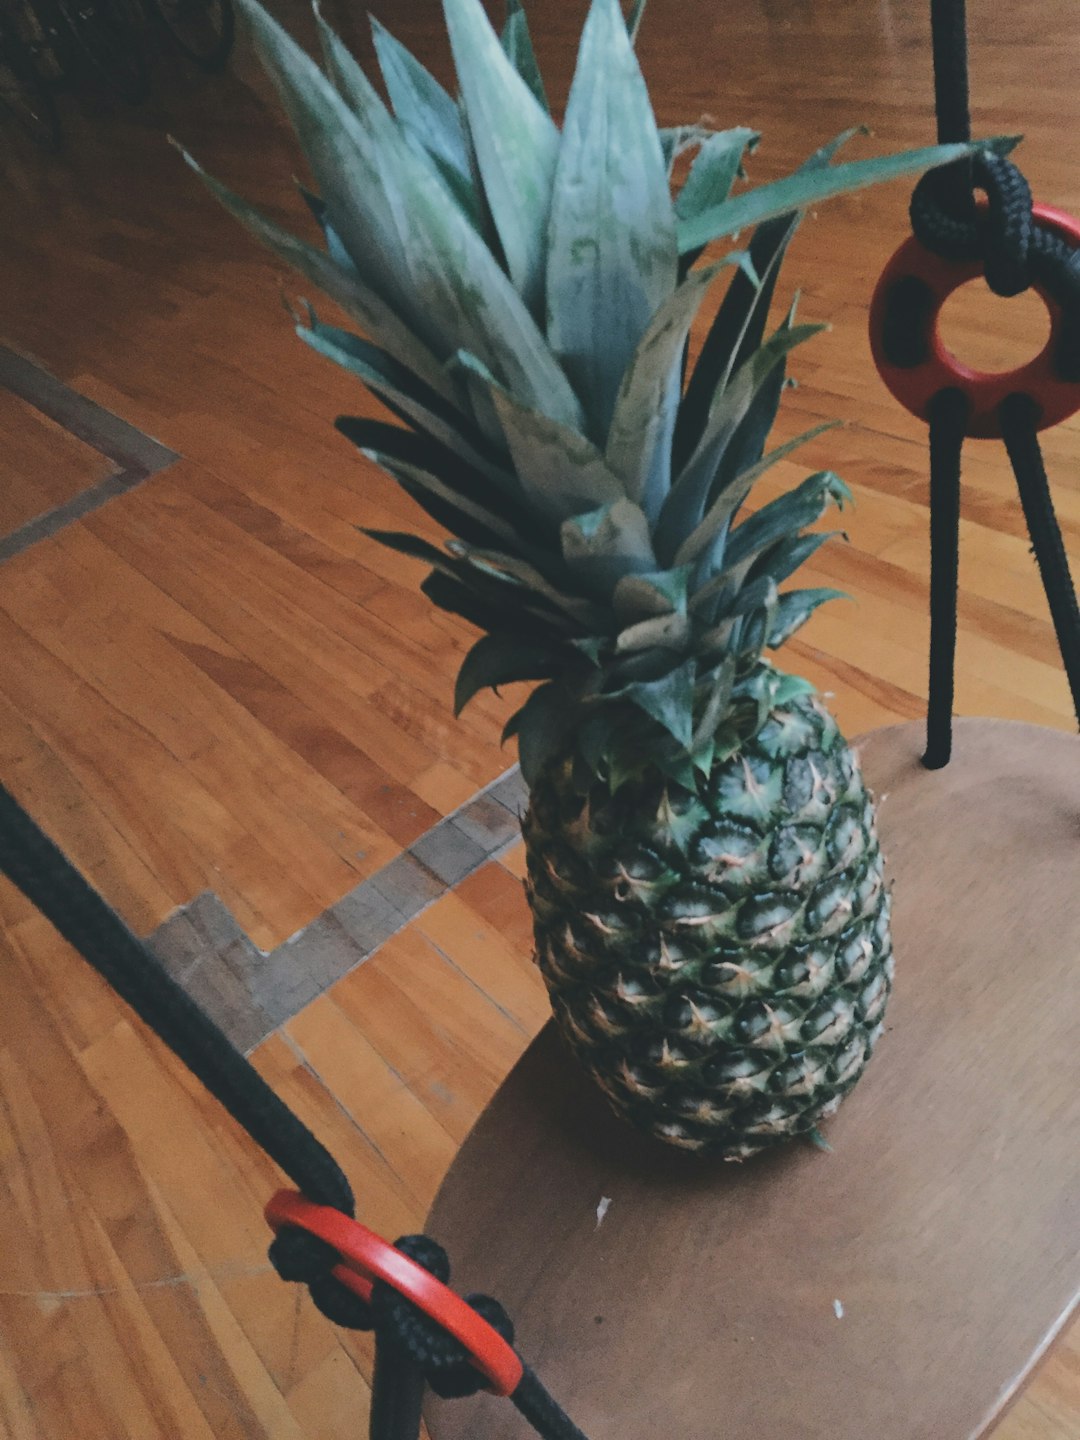 Pineapple photos in Montreal Loft from Airbnb